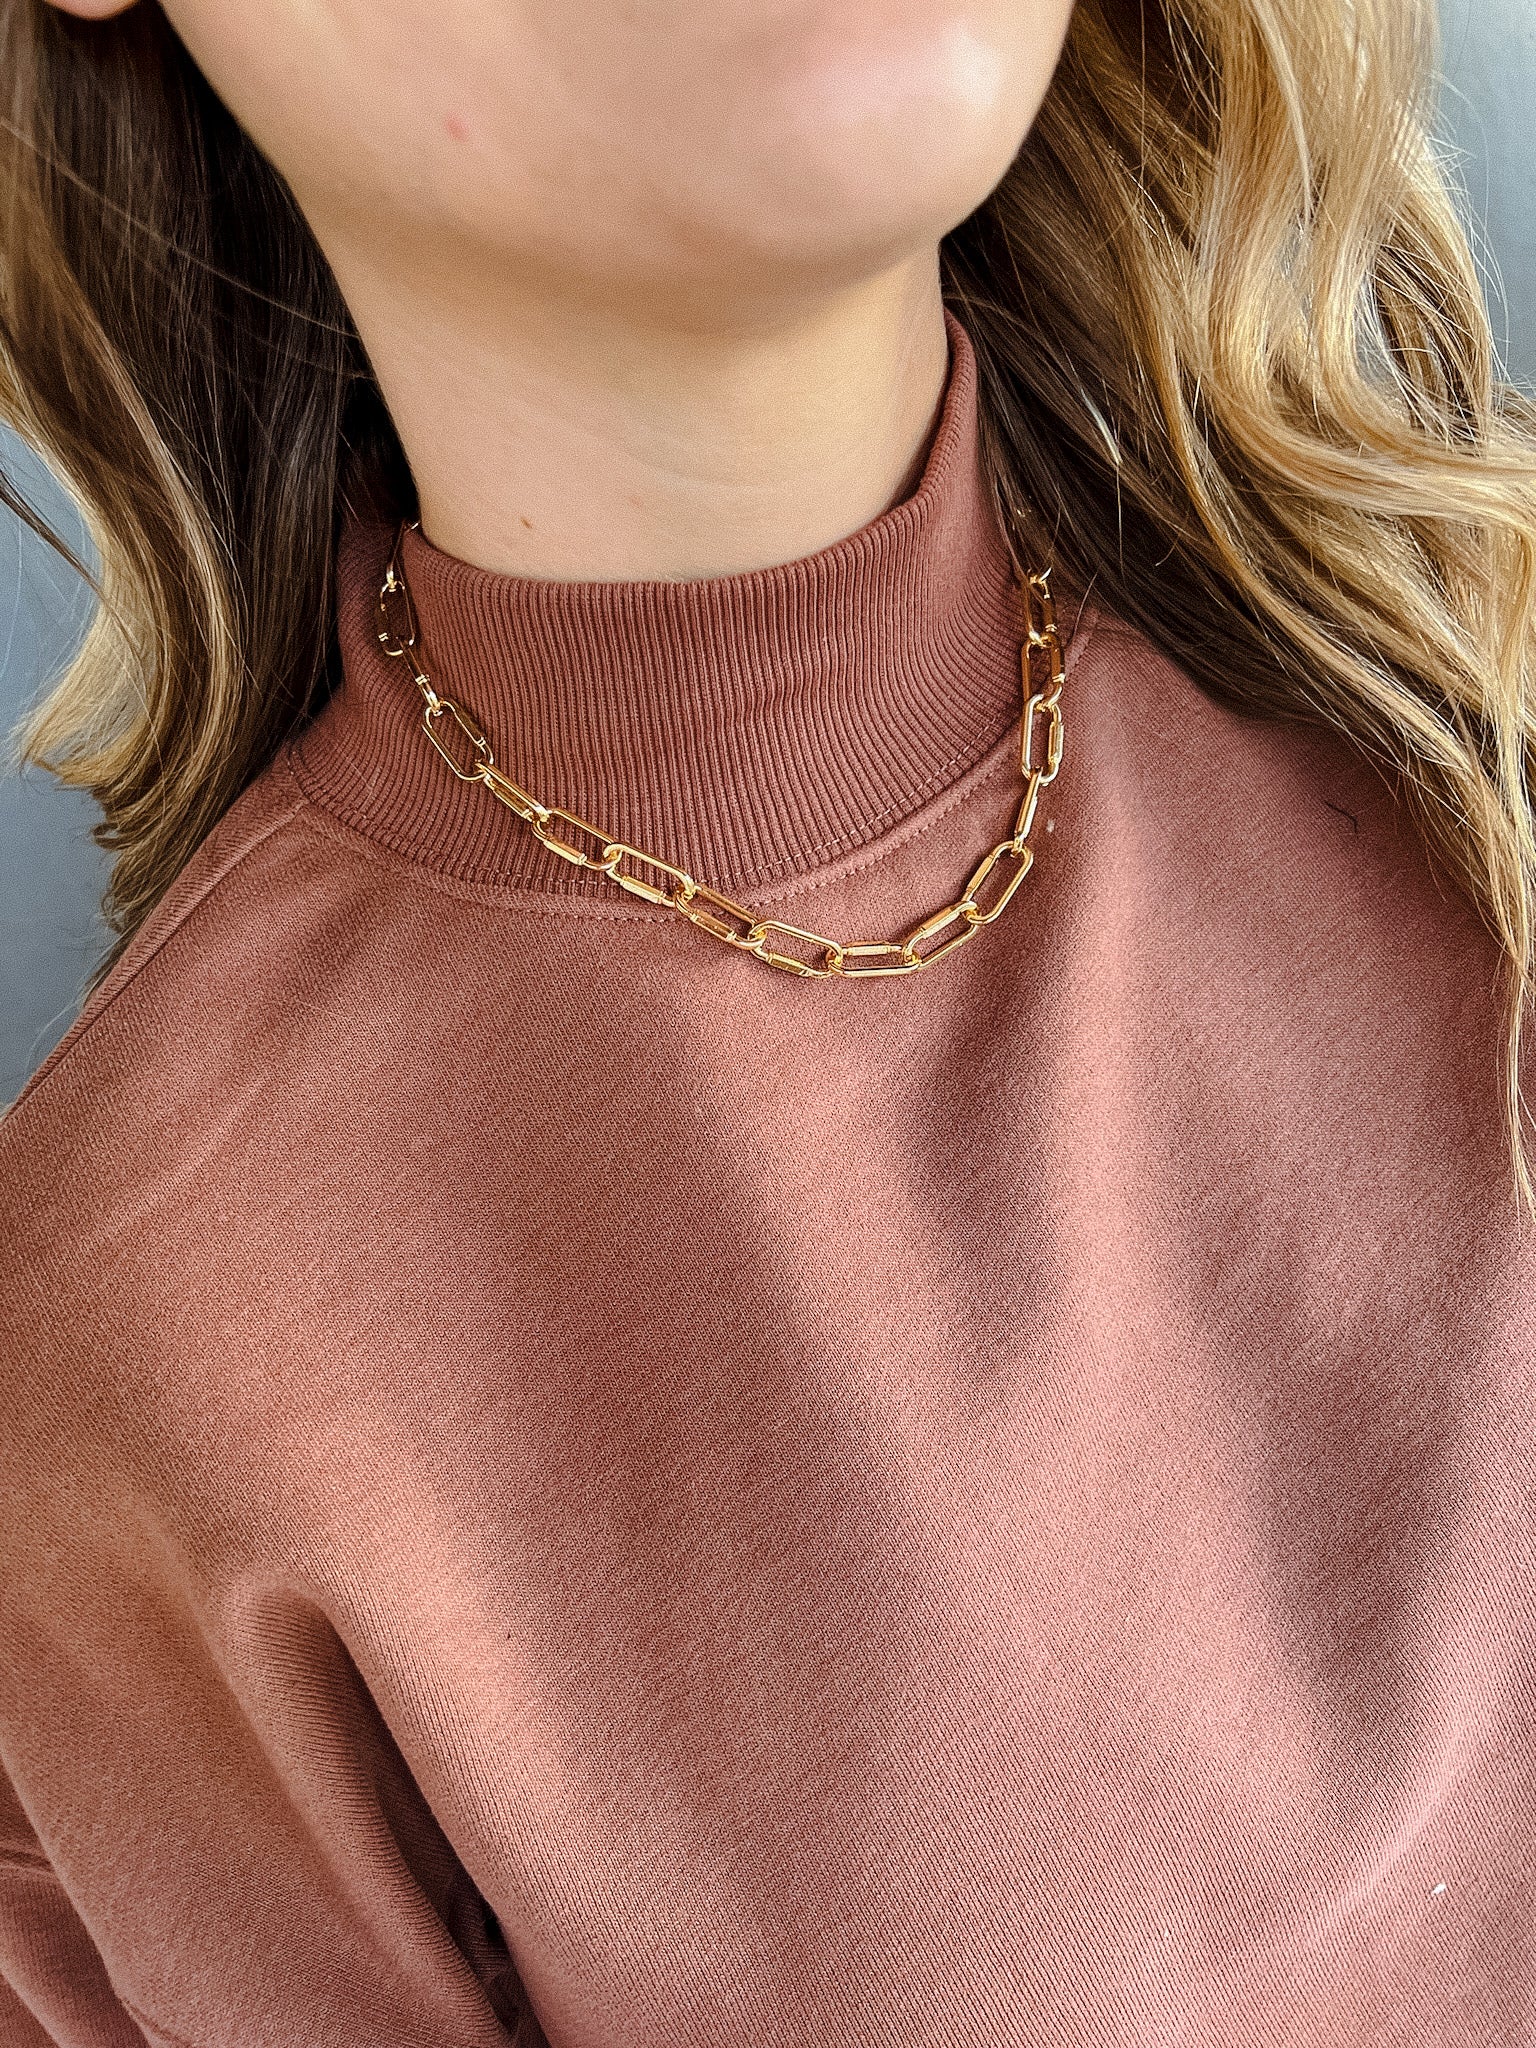 Fergie Gold Chain Necklace - Gold